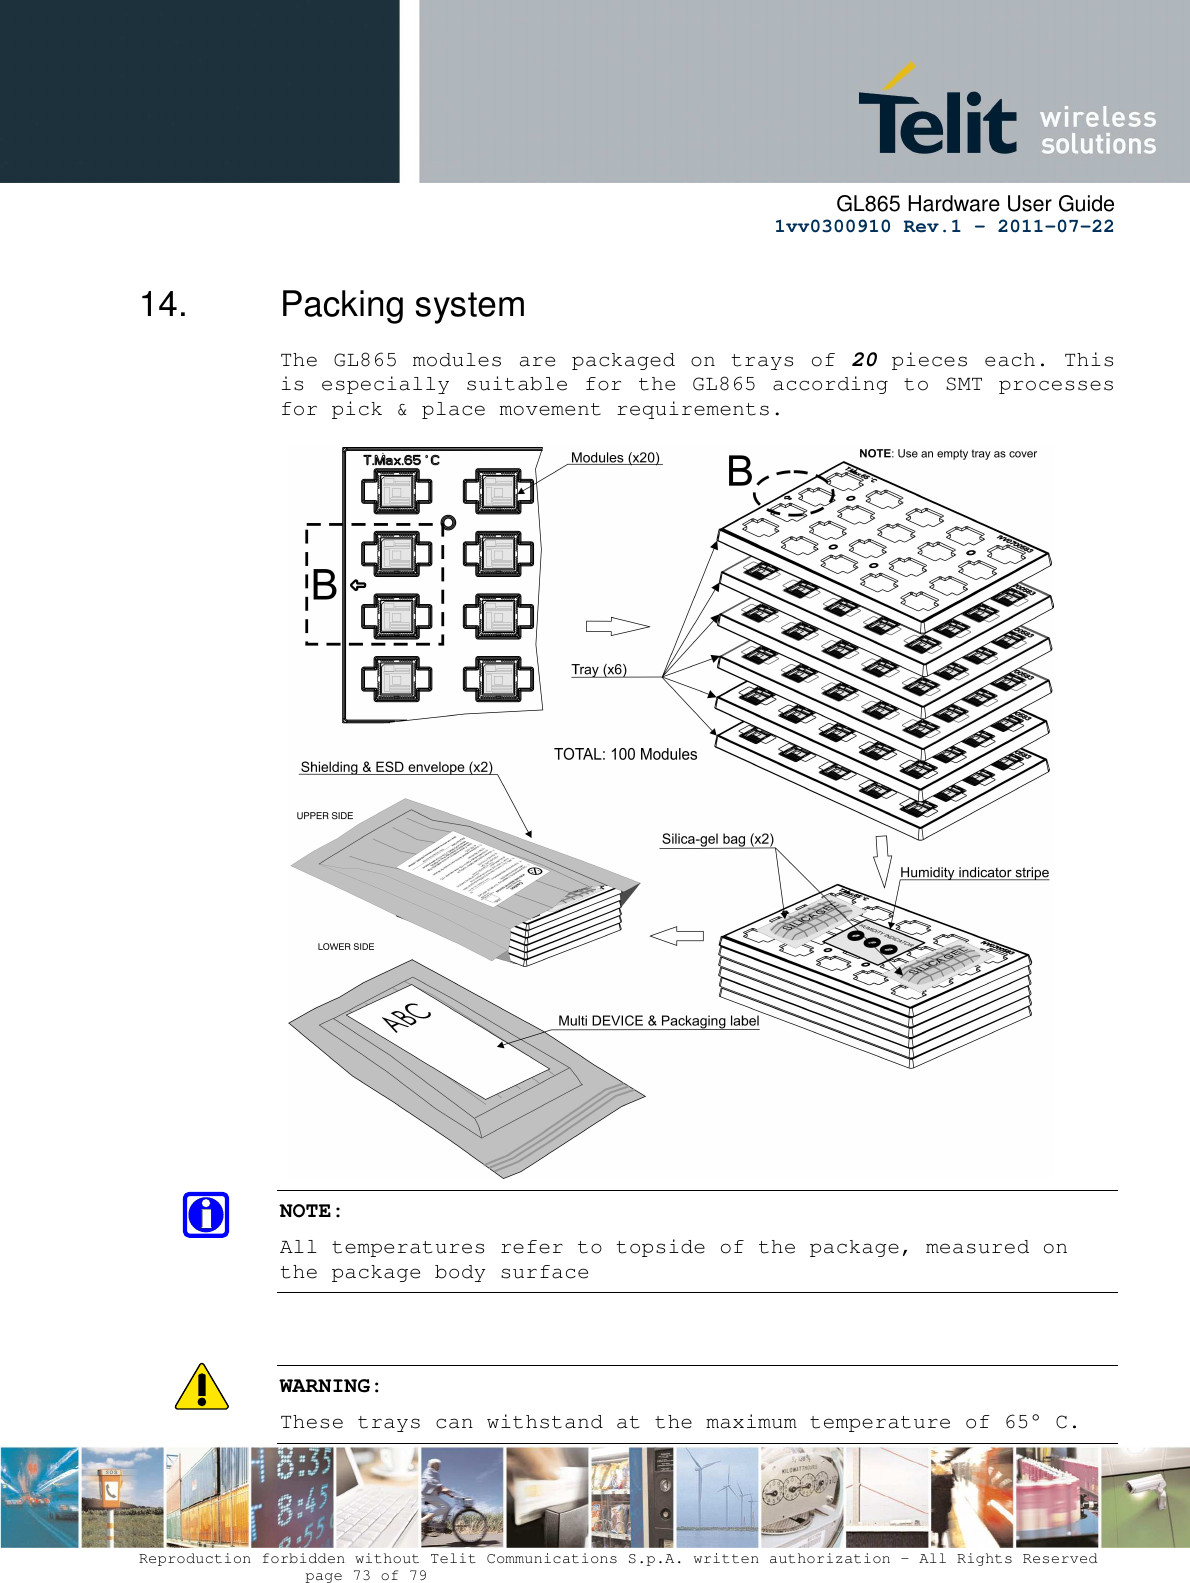      GL865 Hardware User Guide     1vv0300910 Rev.1 – 2011-07-22       Reproduction forbidden without Telit Communications S.p.A. written authorization - All Rights Reserved    page 73 of 79  14.  Packing system  The GL865 modules are packaged on trays of 20 pieces each. This is especially suitable for the GL865 according to SMT processes for pick &amp; place movement requirements.                               NOTE: All temperatures refer to topside of the package, measured on the package body surface    WARNING: These trays can withstand at the maximum temperature of 65° C. 